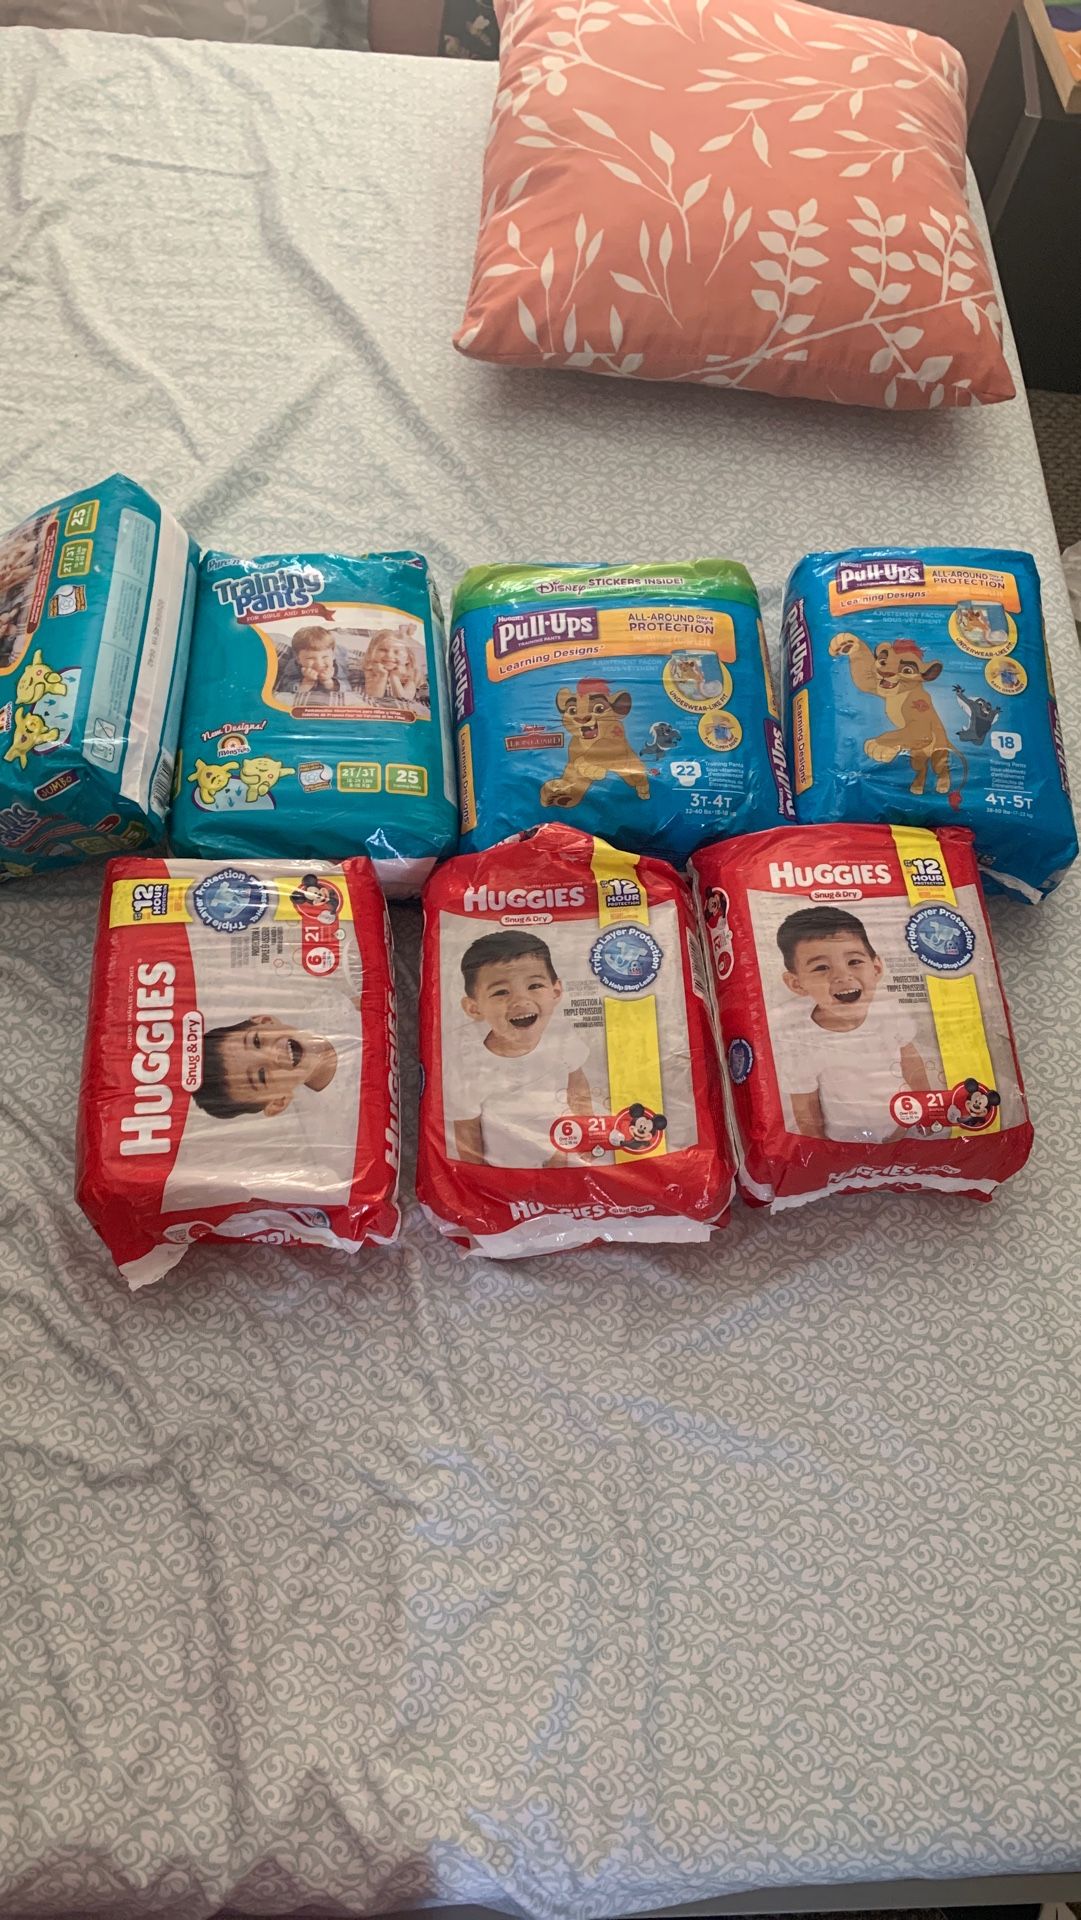 Diapers brand new, one bag is opened but untouched